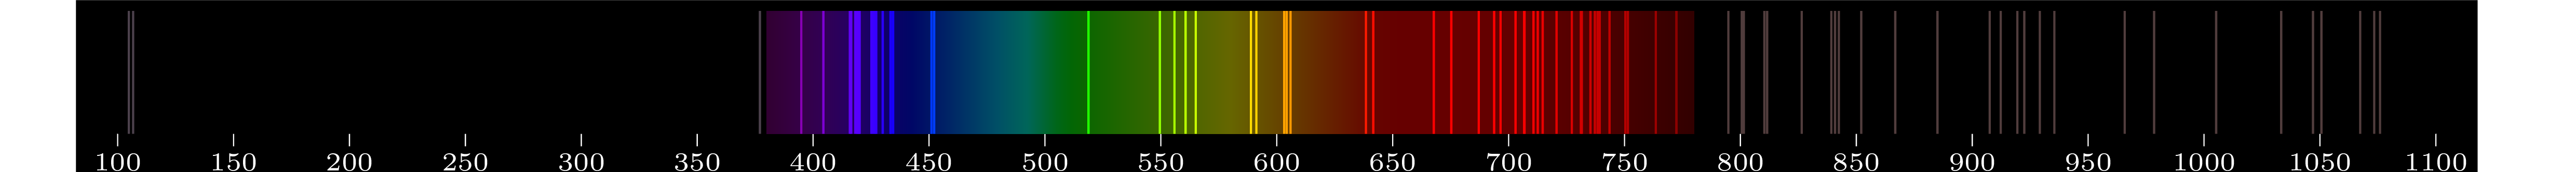 emmision spectra of element Ar